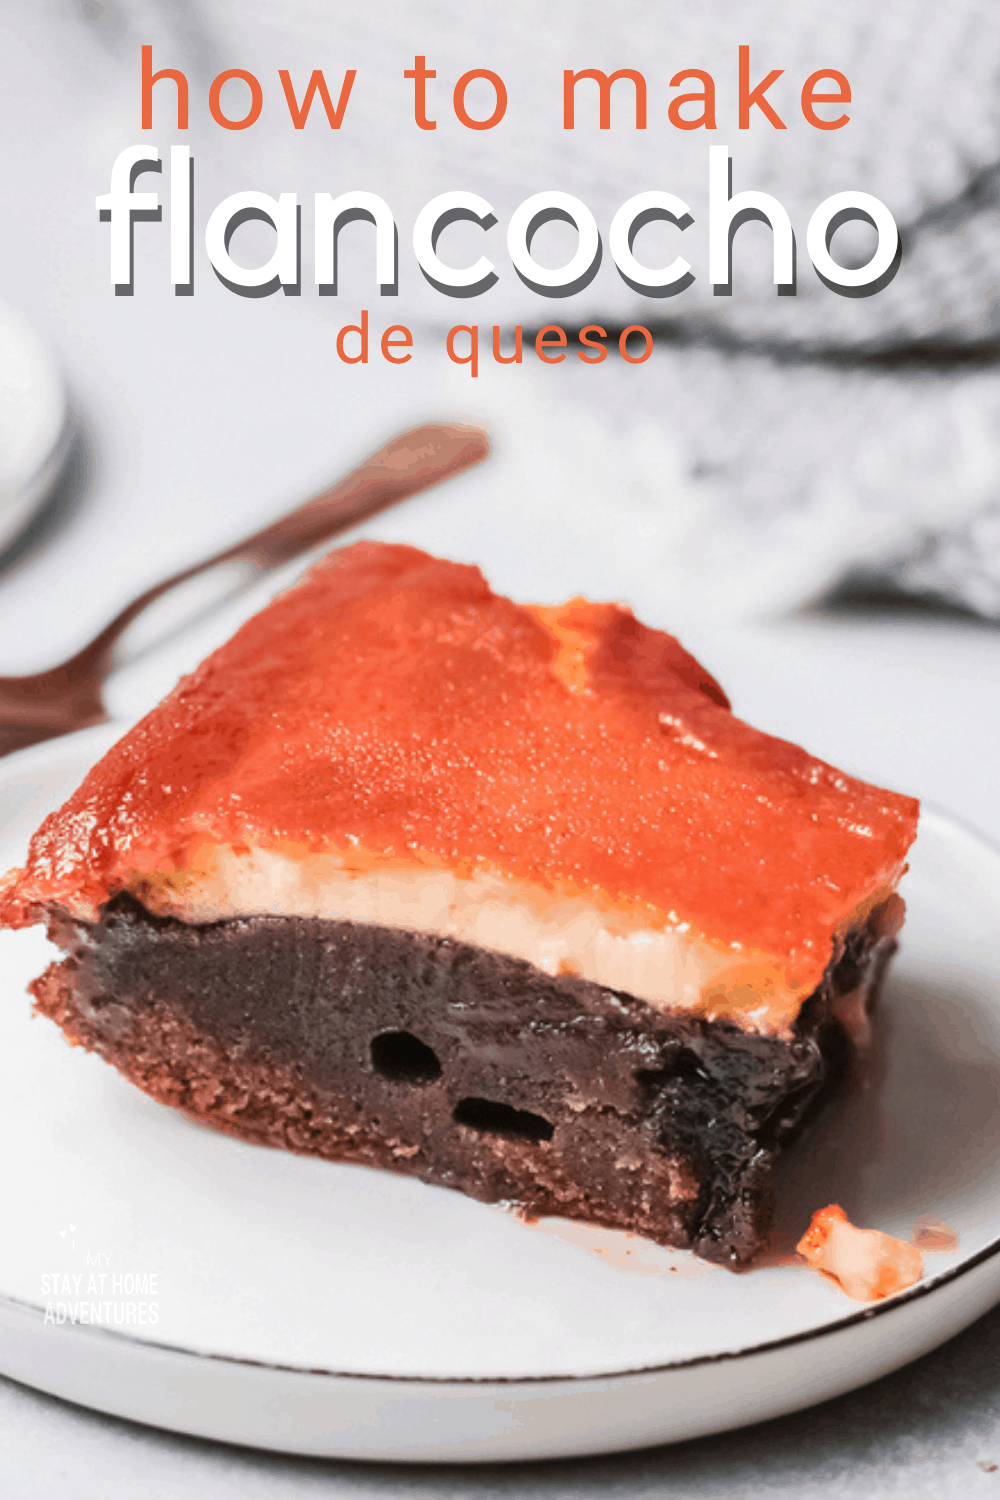 This recipe for Puerto Rican flancocho de queso is a traditional dessert made with two types of cake and flan. It's easy to make but tastes indulgent! Find out how to make this delicious, rich dish that'll impress your friends and family in minutes flat. via @mystayathome